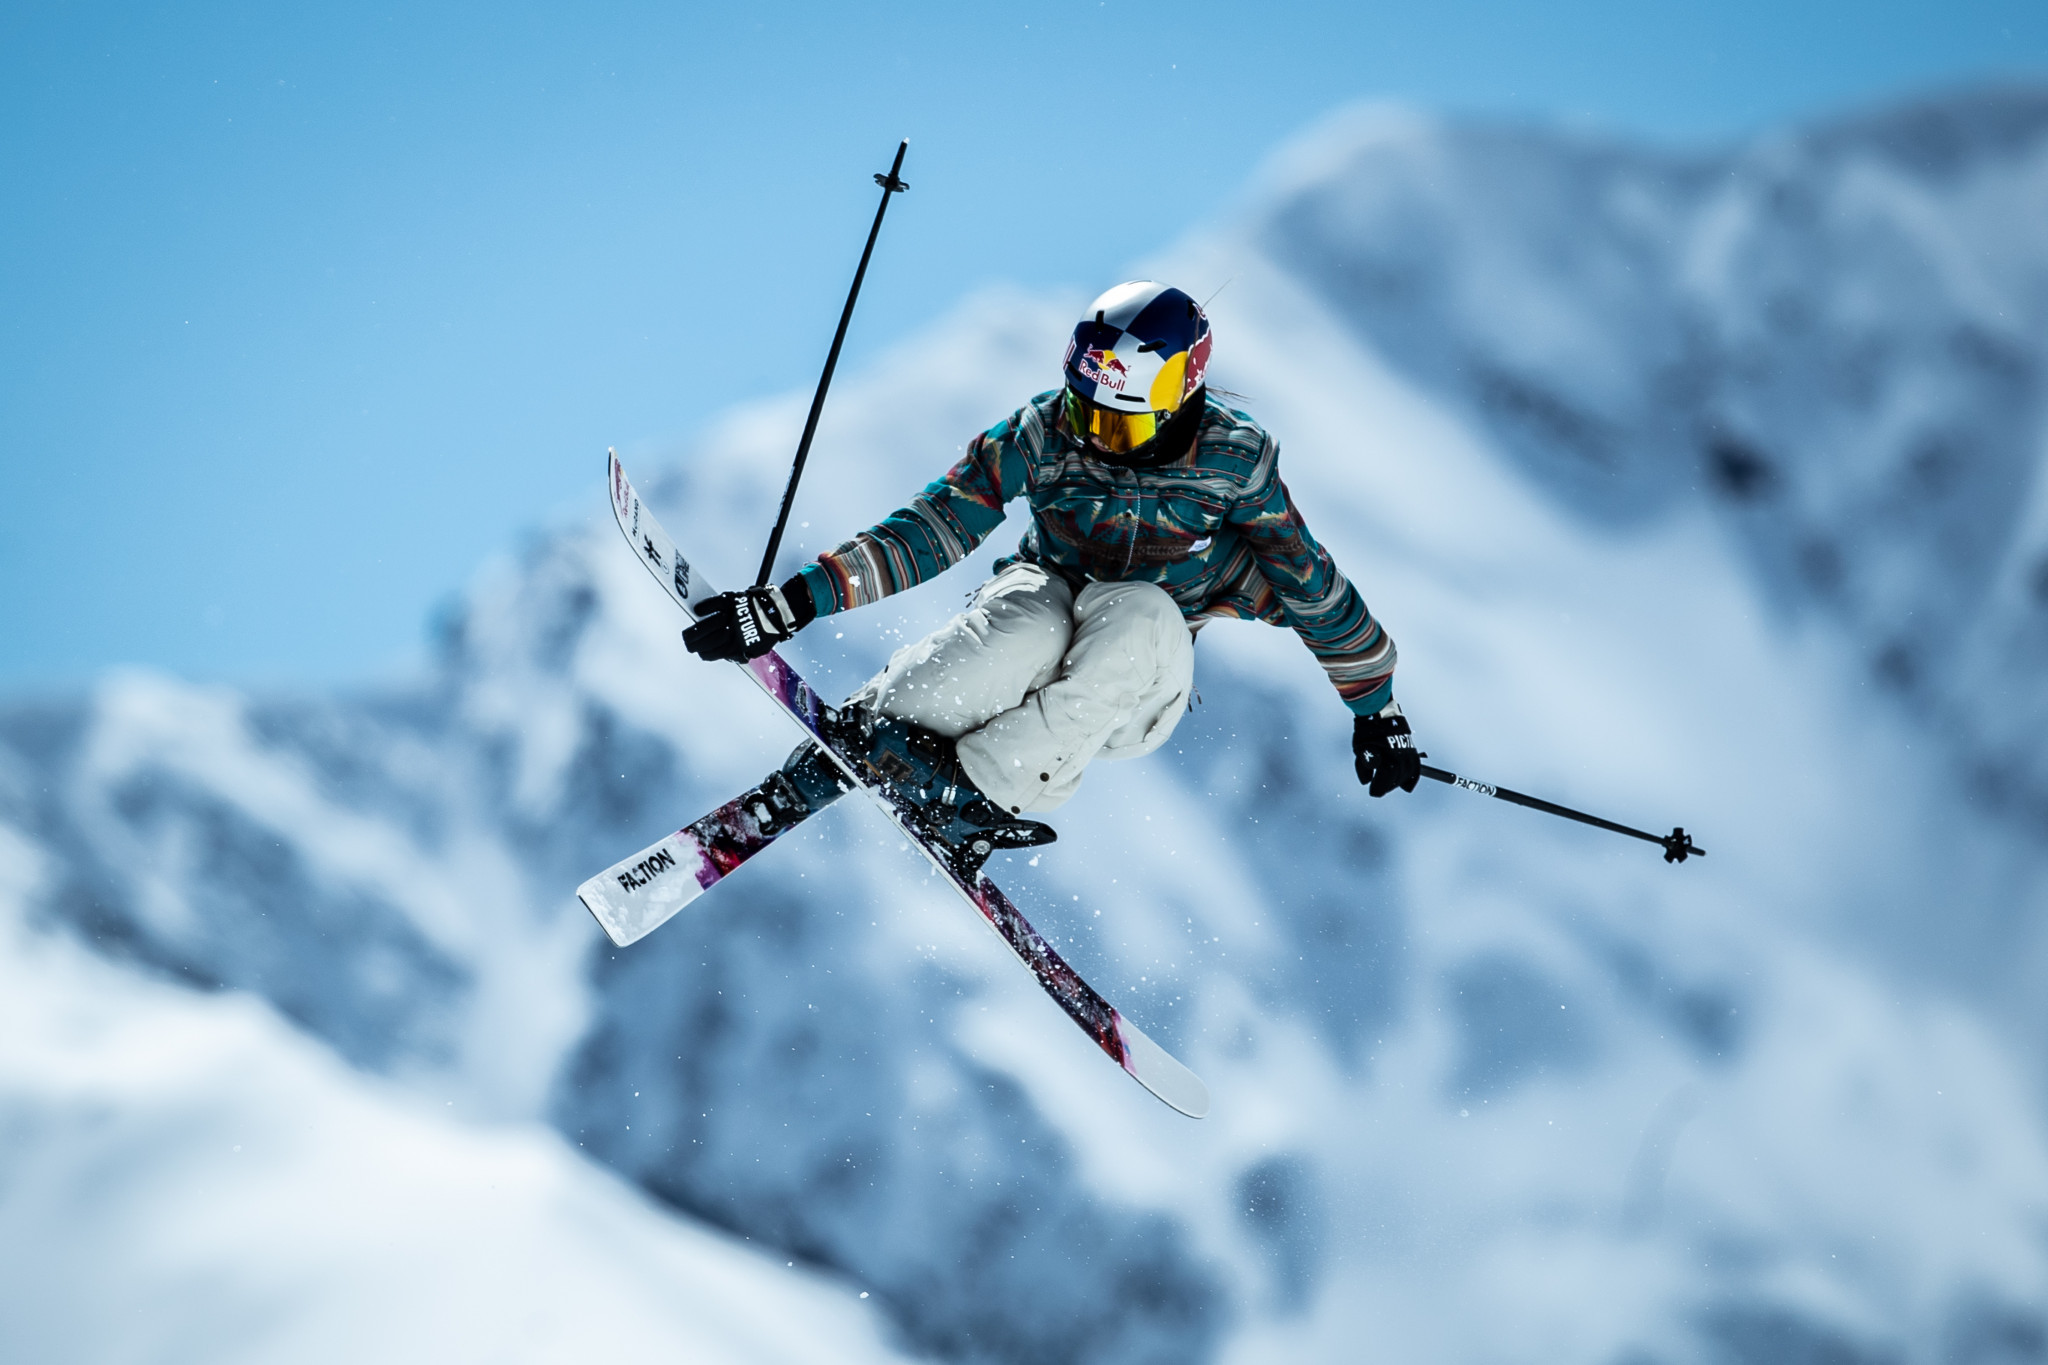 Beijing 2022 venue plays host to big air stars in FIS Freeski World Cup